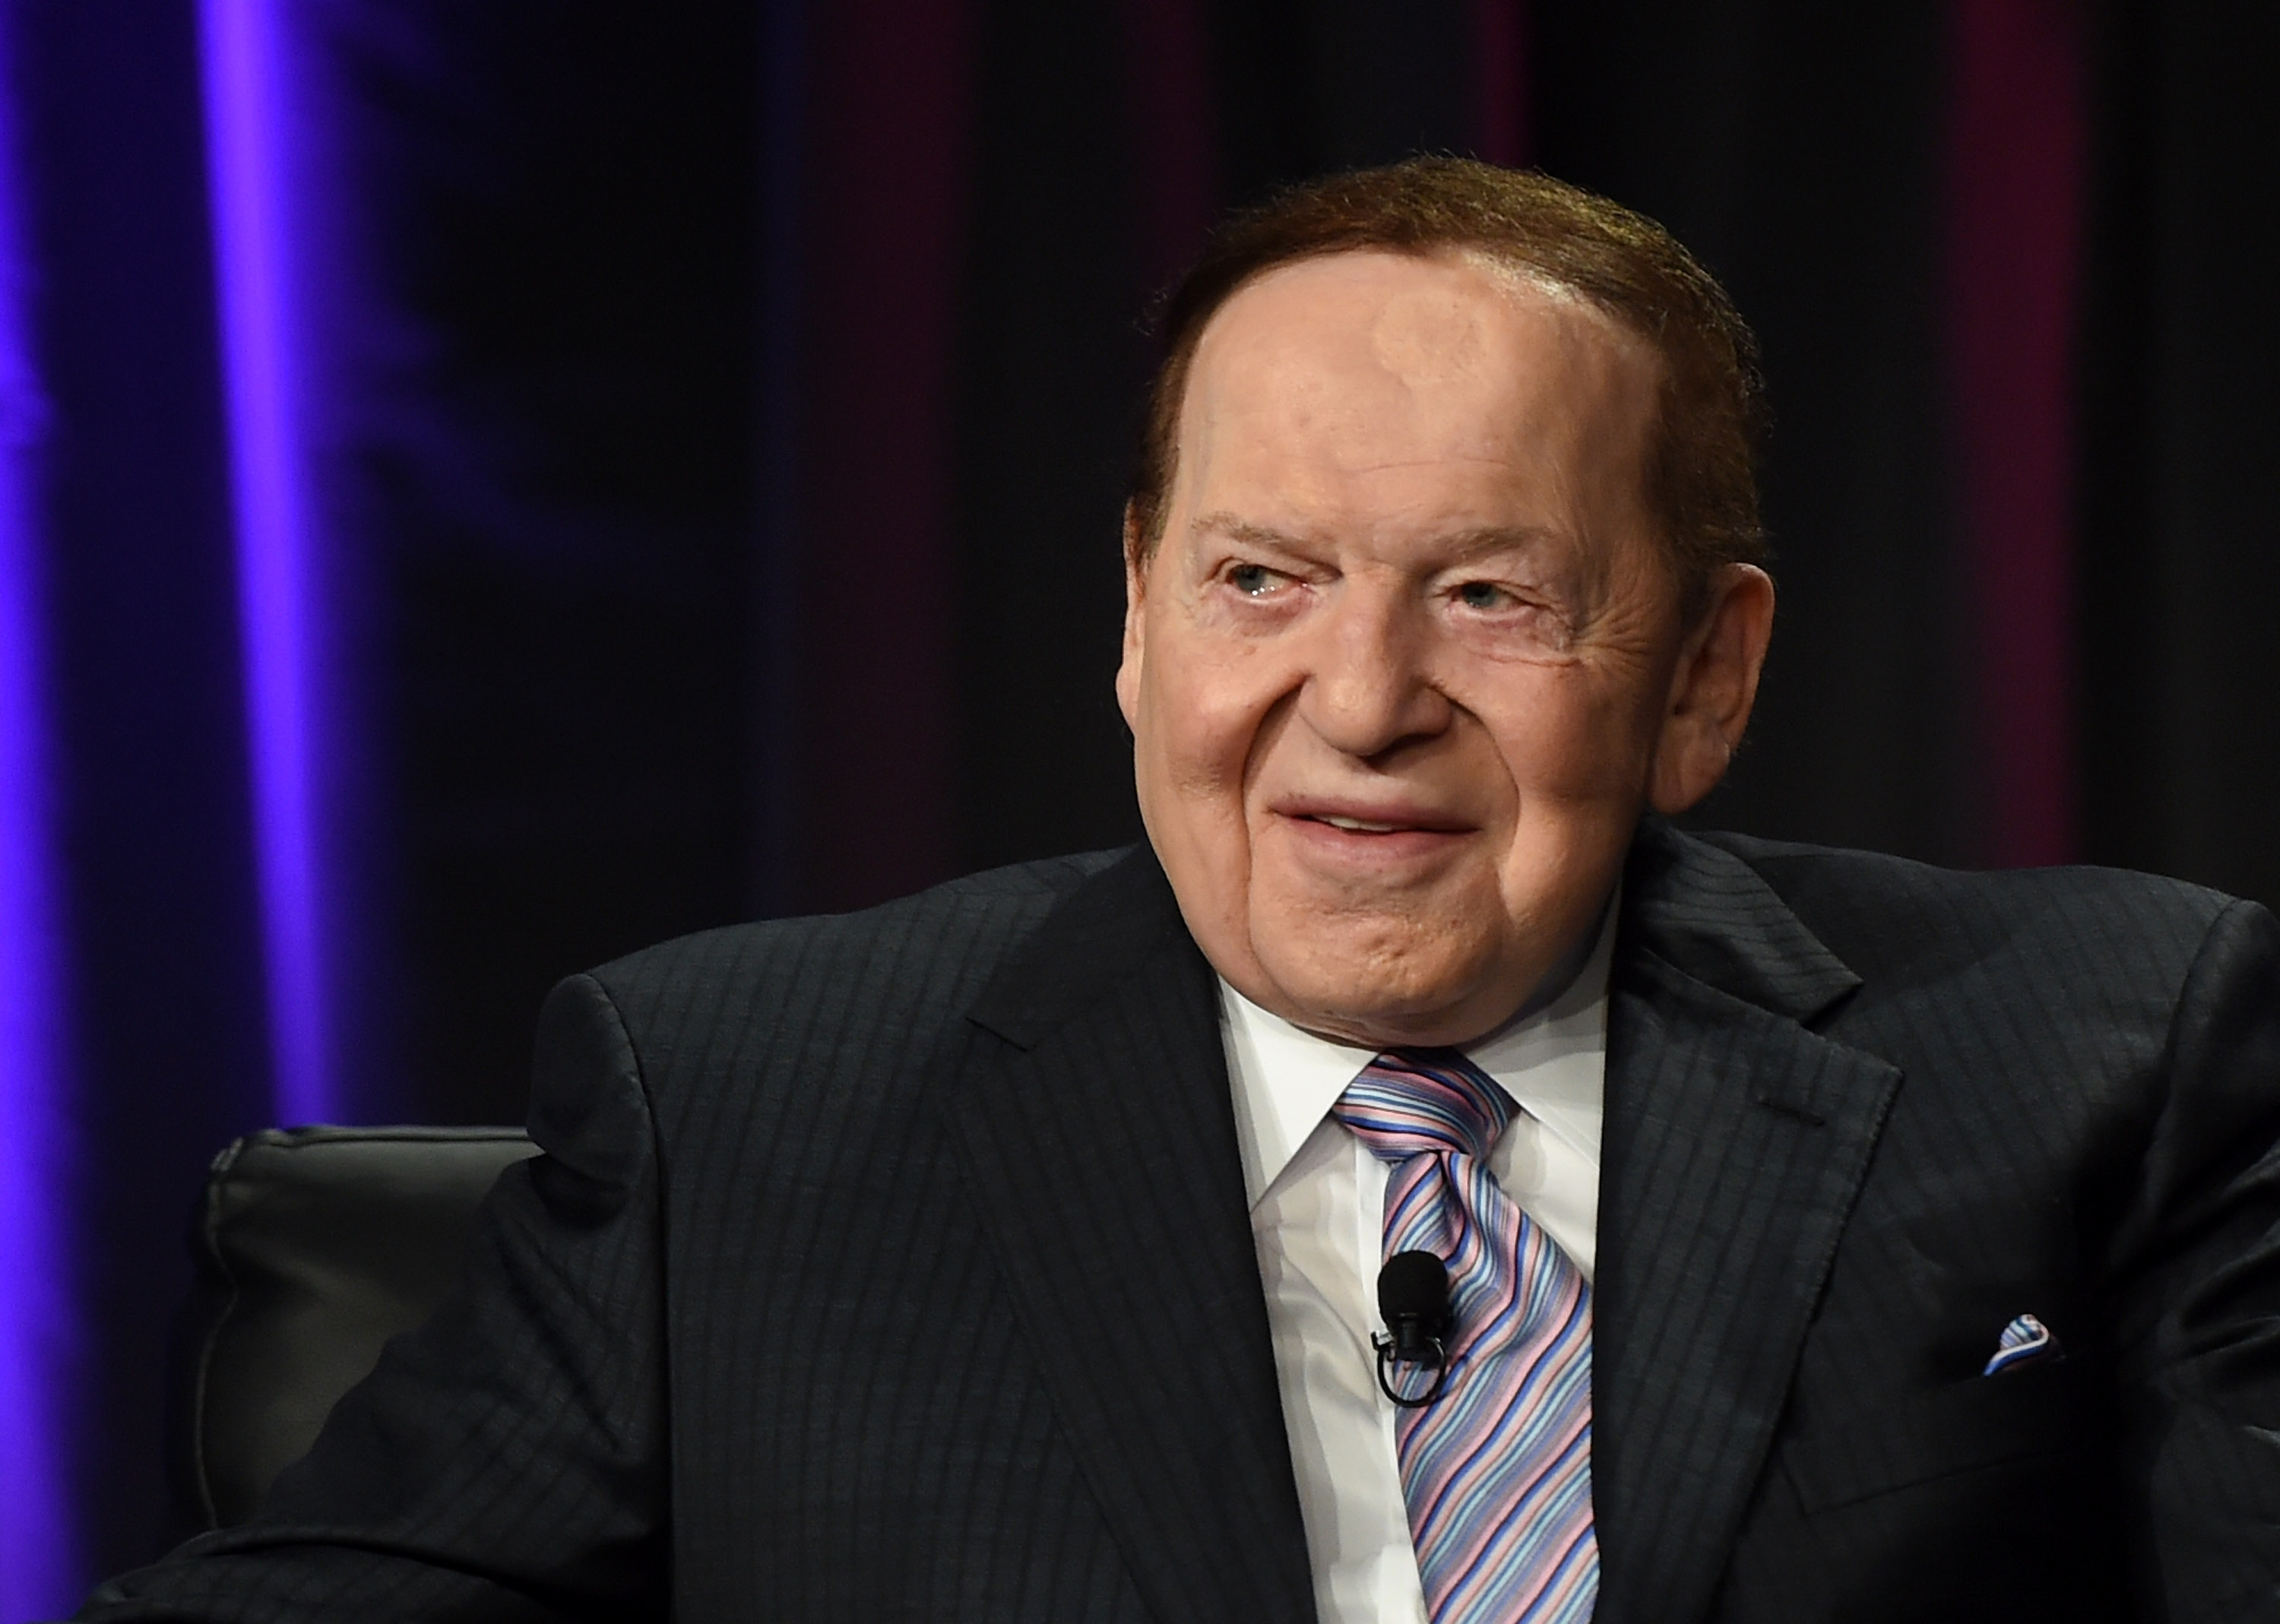 Las Vegas Sands Corp. Chairman and CEO Sheldon Adelson speaks at the Global Gaming Expo (G2E) 2014 at the Venetian Las Vegas in Las Vegas on Oct. 1, 2014 (Ethan Miller—Getty Images)